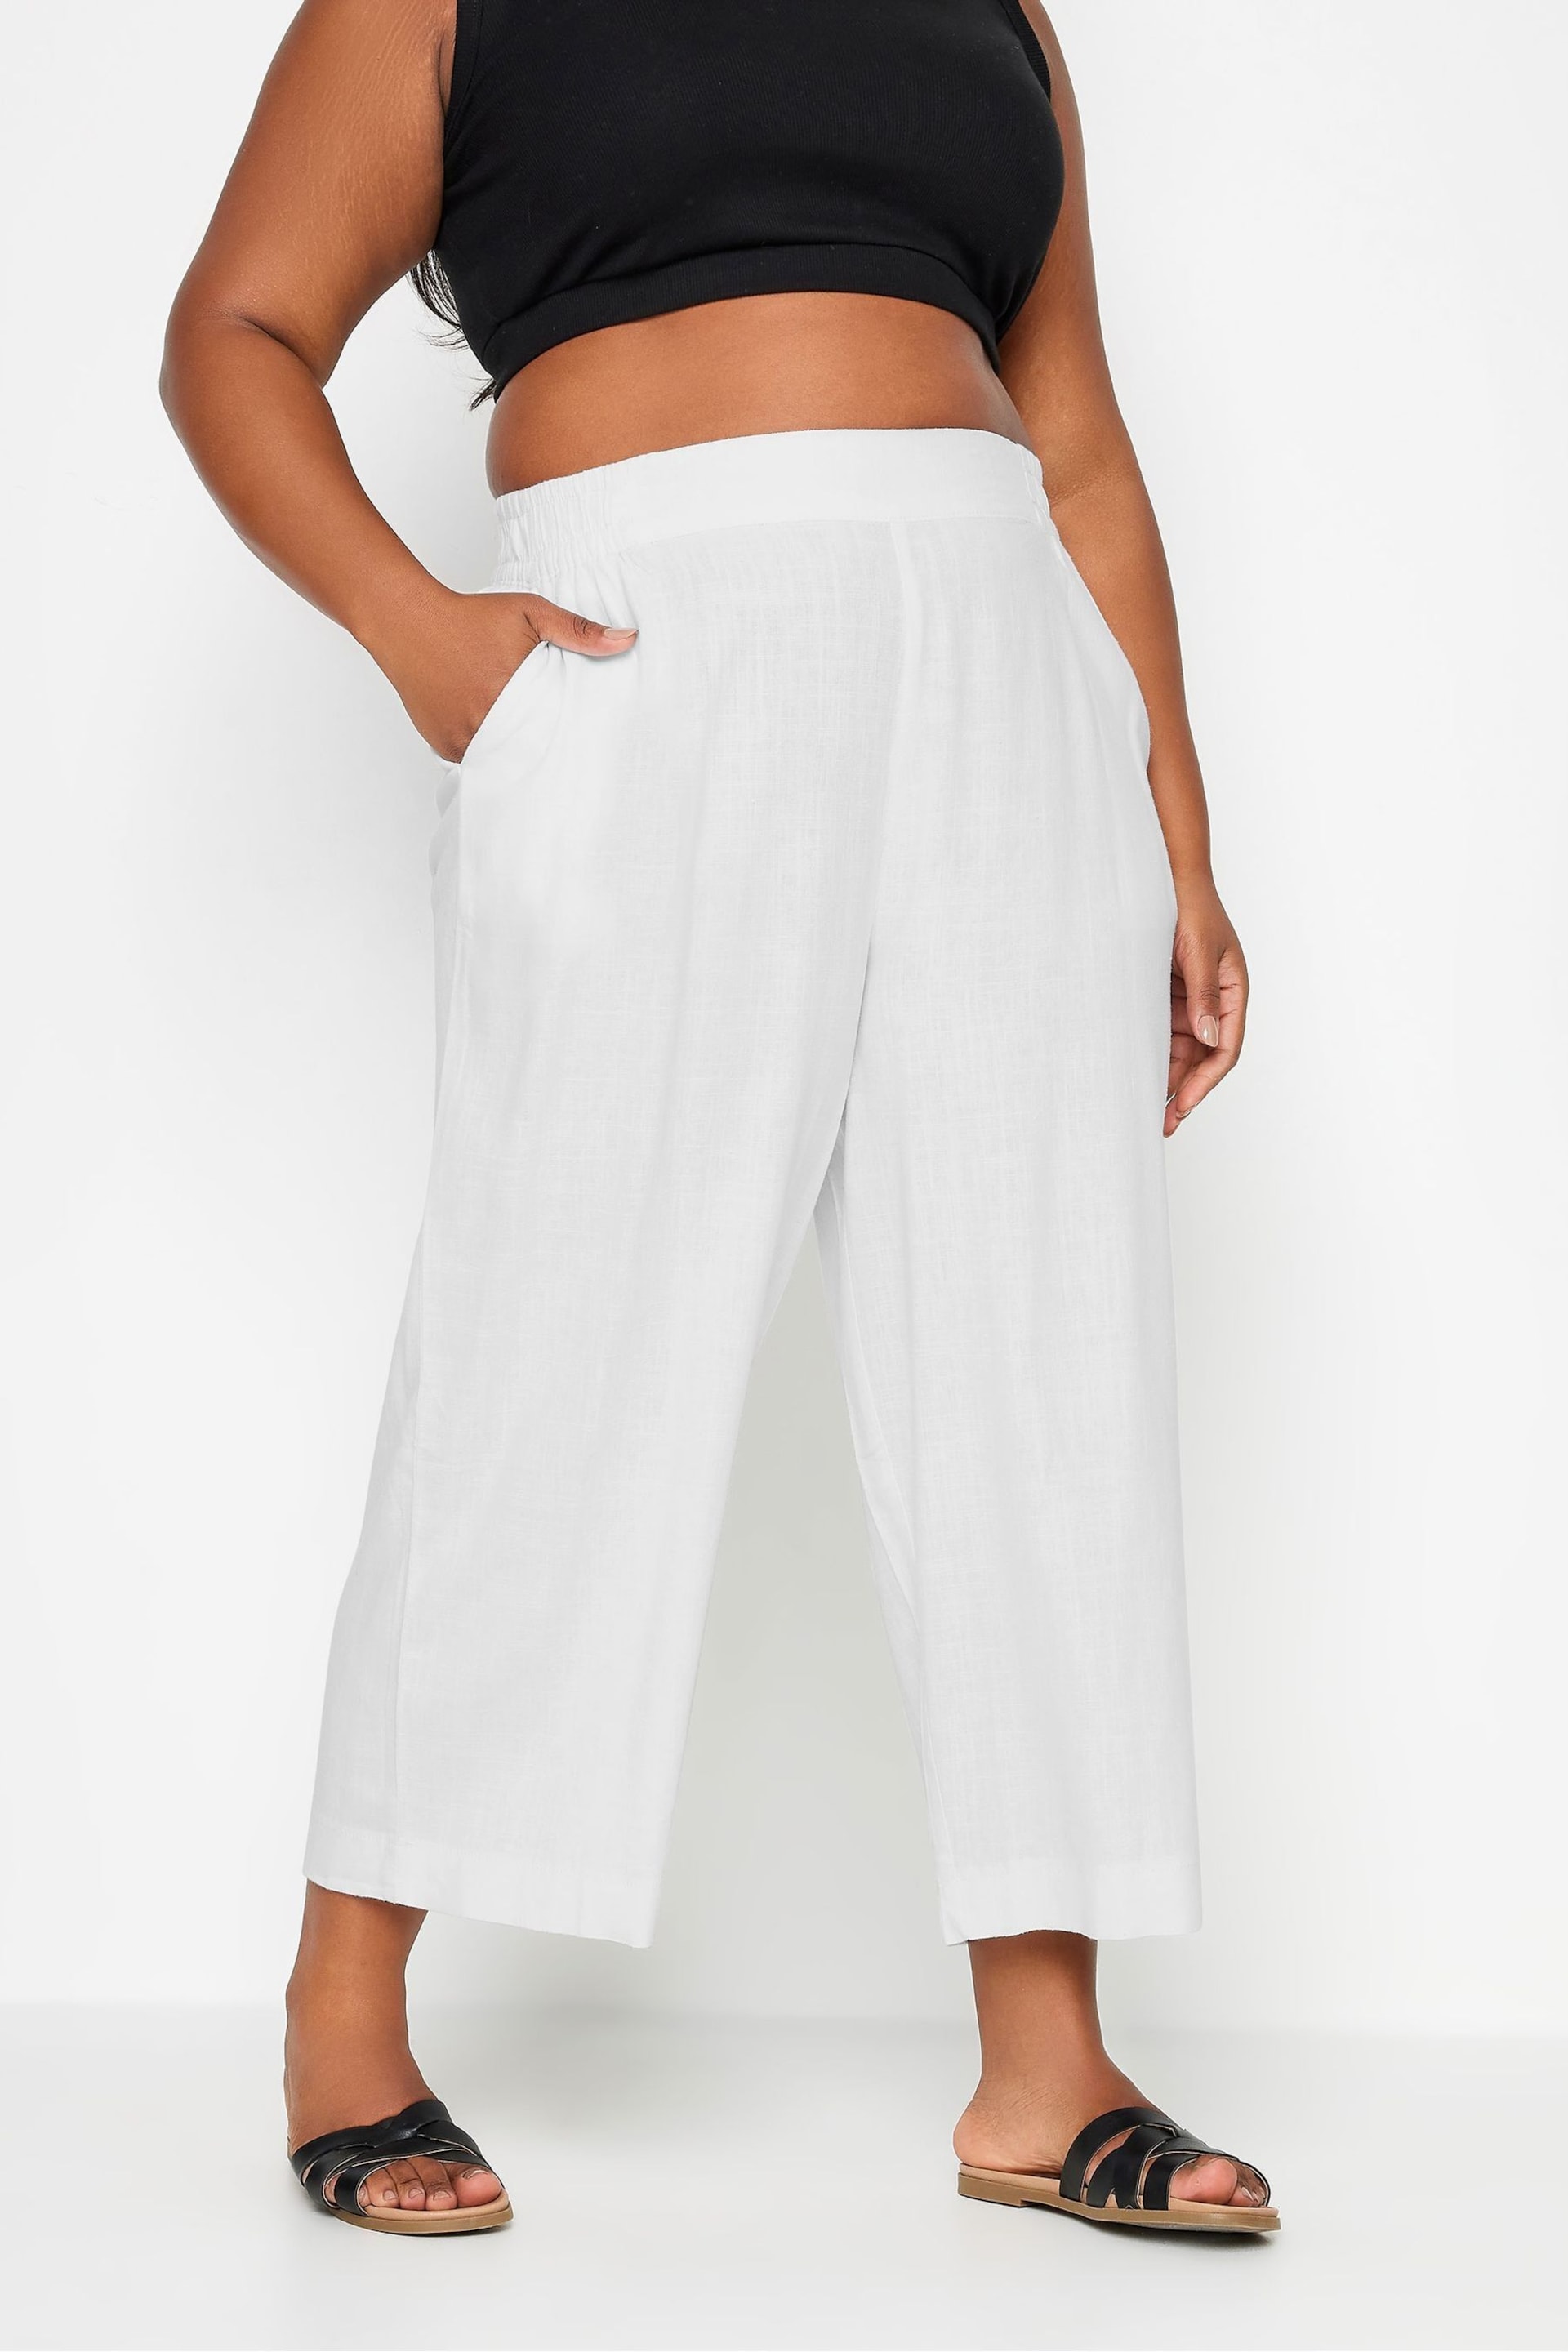 Yours Curve White Wide Leg Cropped Linen Trousers - Image 2 of 5